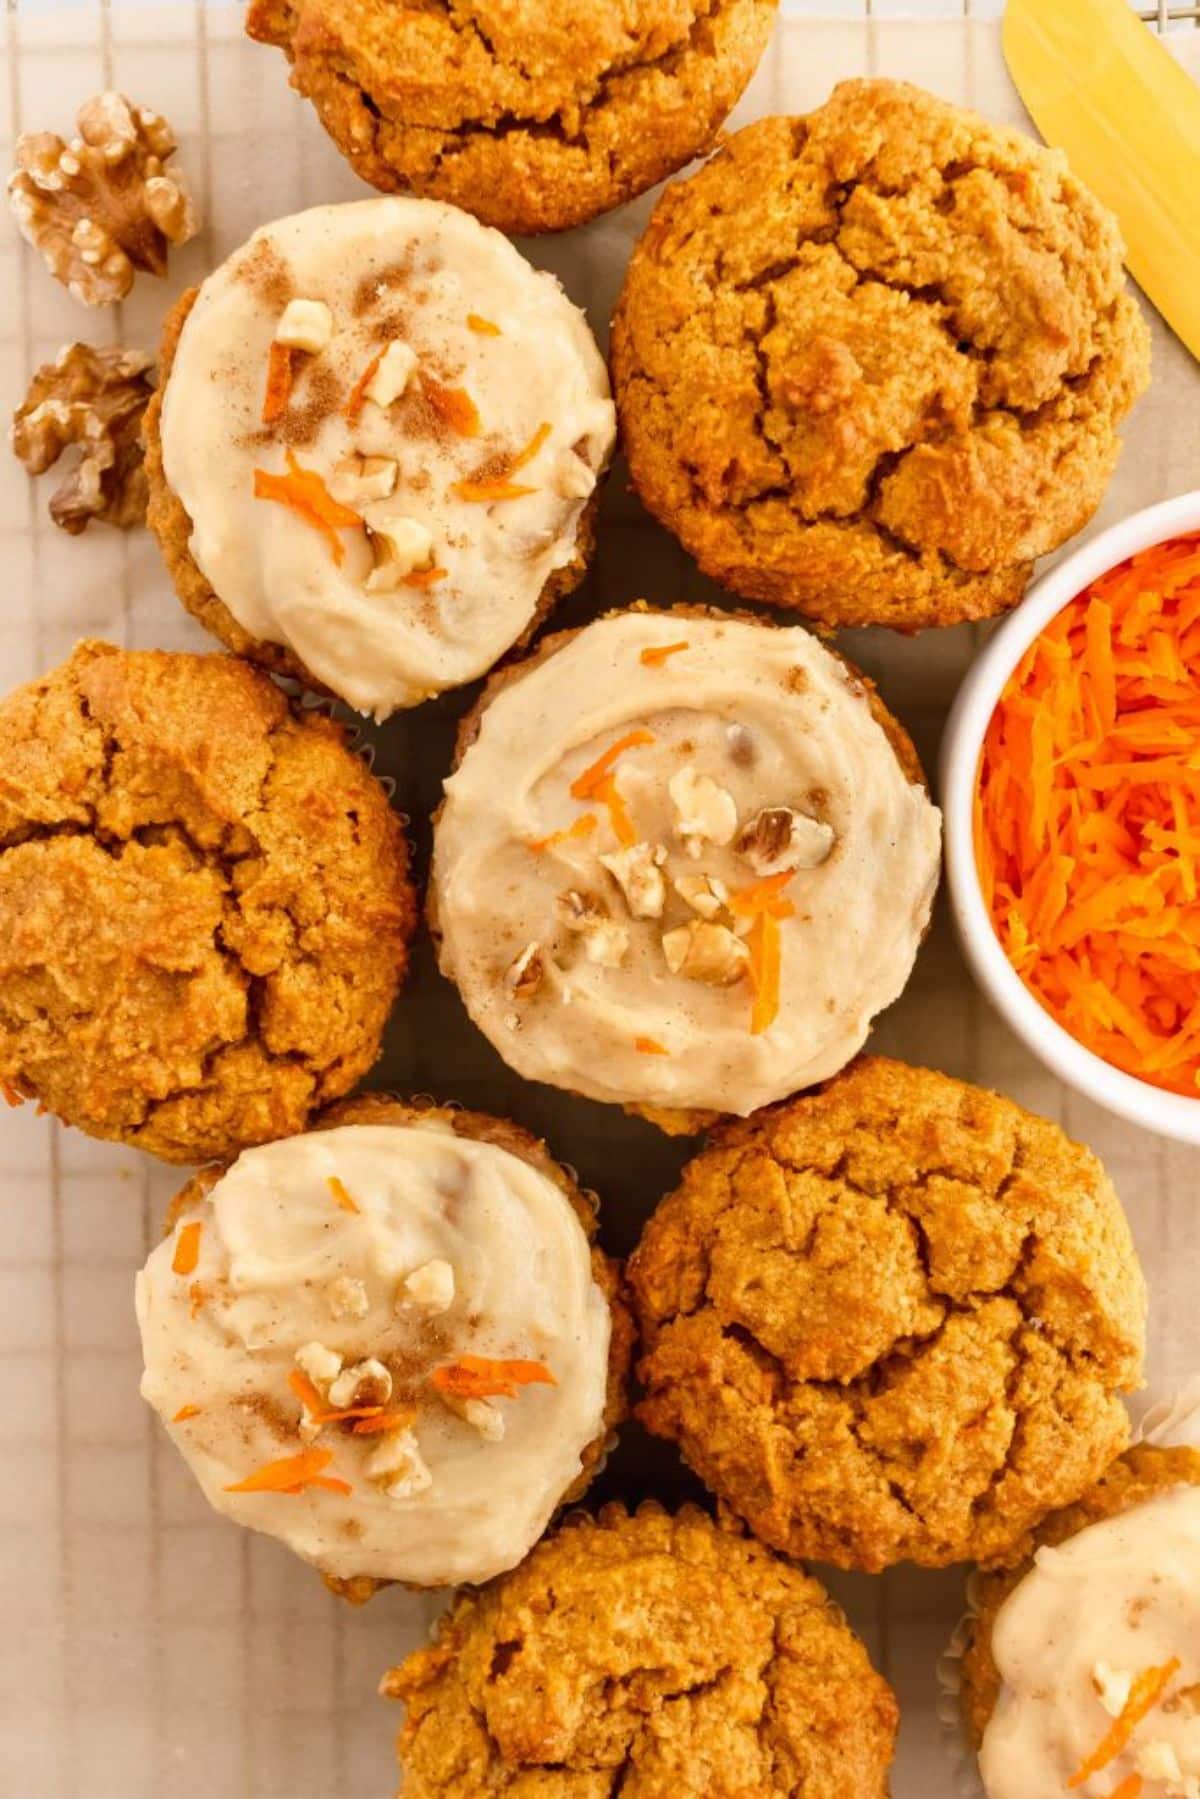 Flavorful gluten-free pumpkin carrot muffins on a resting grid.